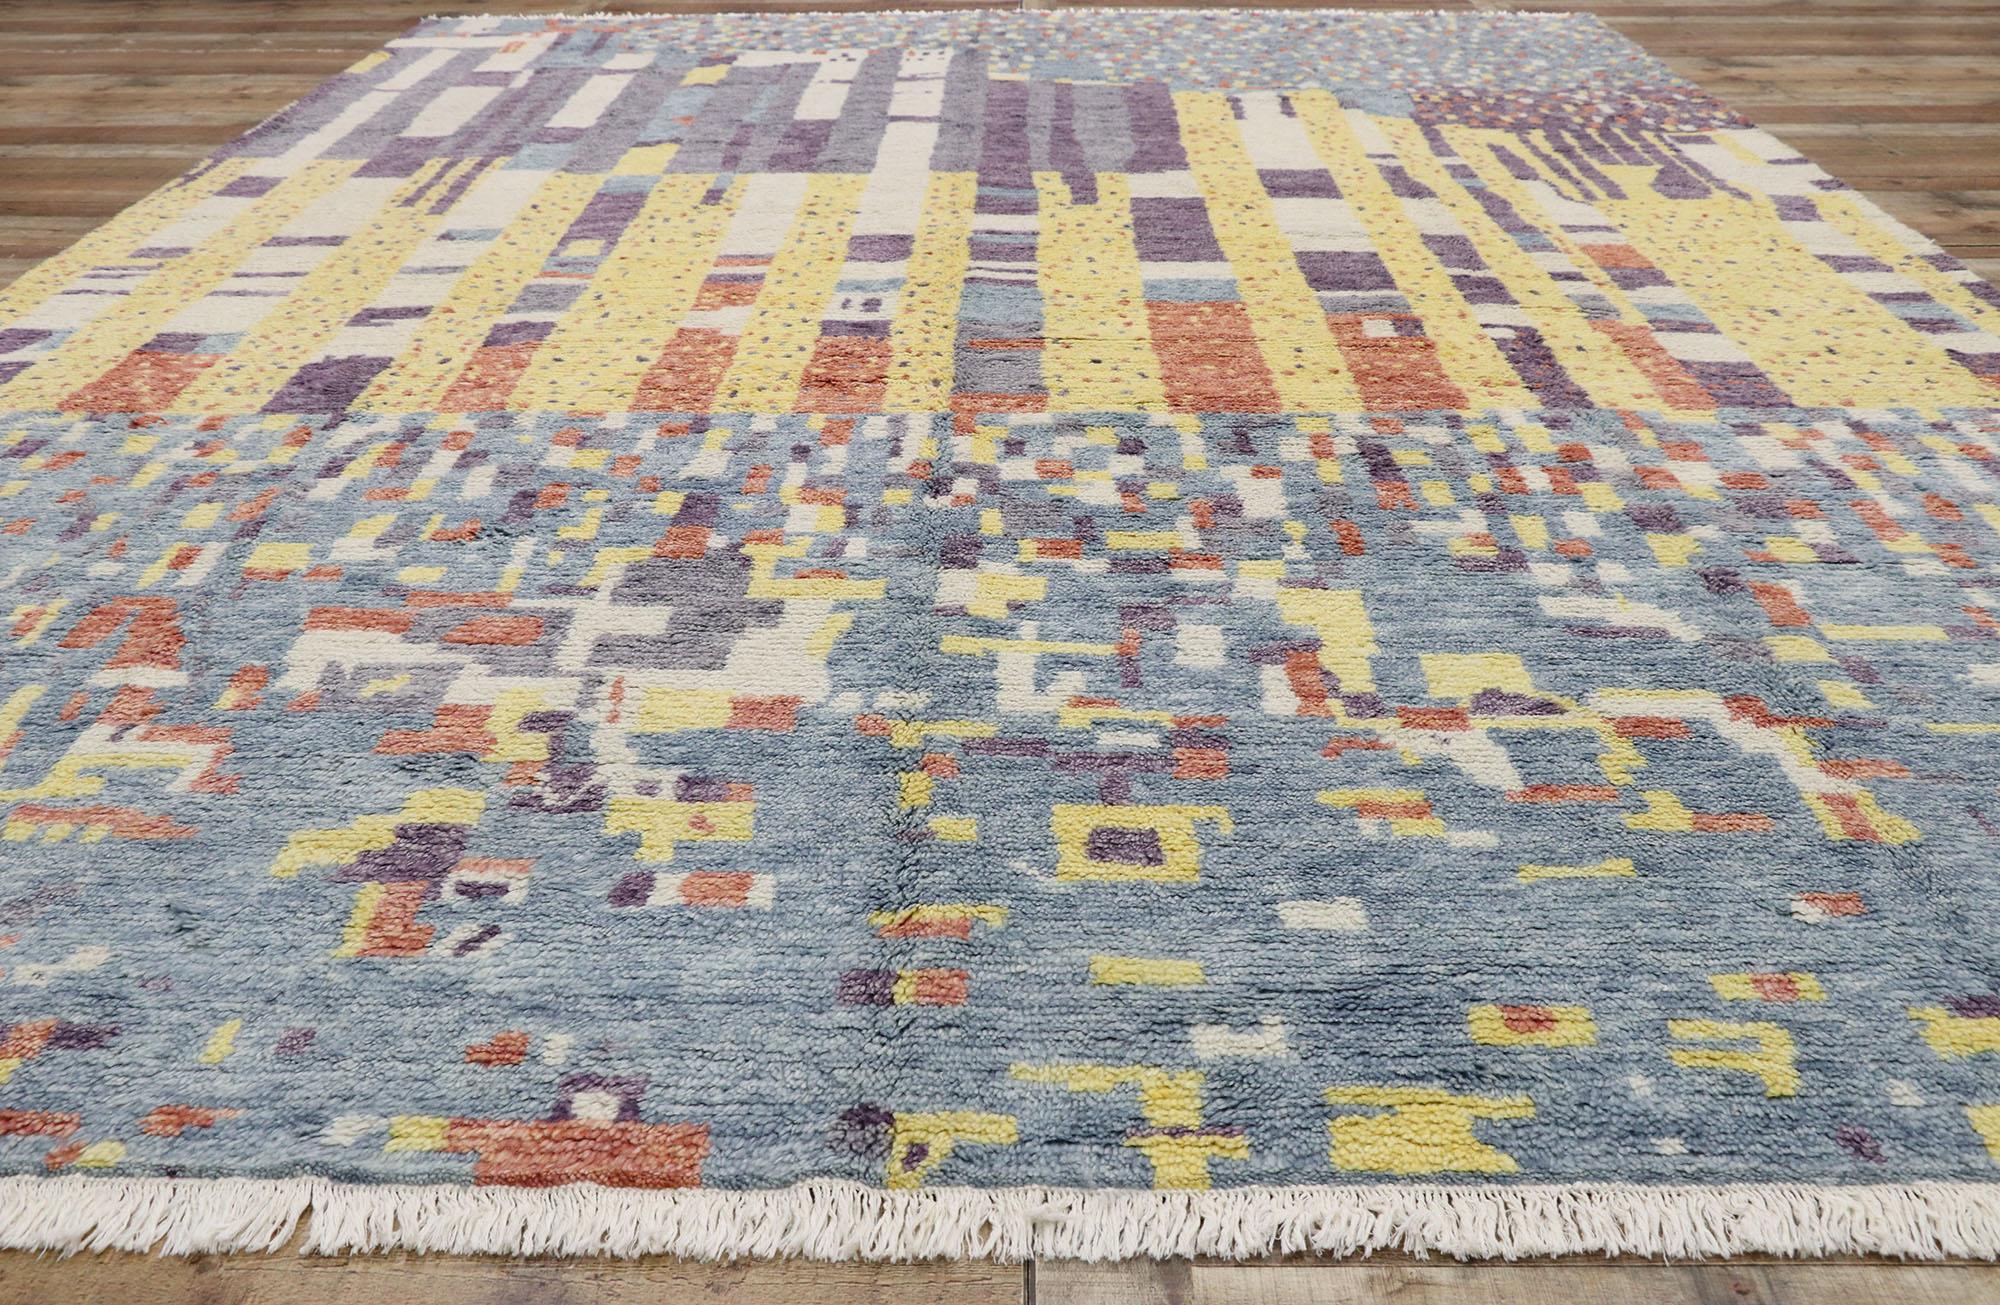 New Color Block Moroccan Style Rug Inspired by Gunta Stölzl  In New Condition For Sale In Dallas, TX